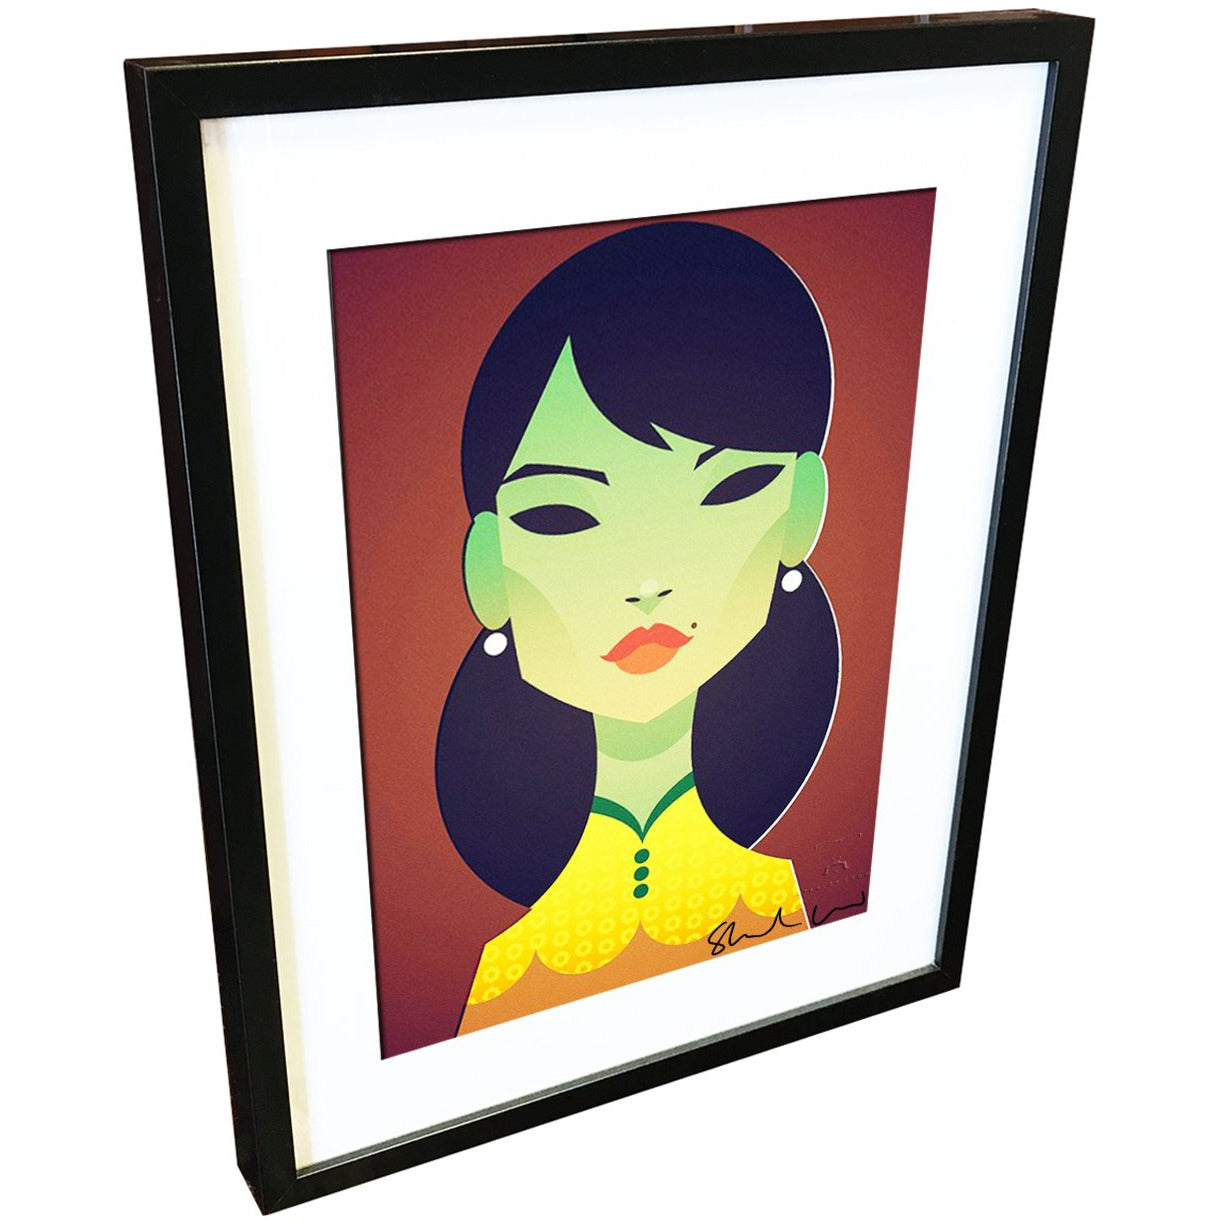 The Green Lady by Stanley Chow - Signed and stamped fine art print - Egoiste Gallery - Art Gallery in Manchester City Centre